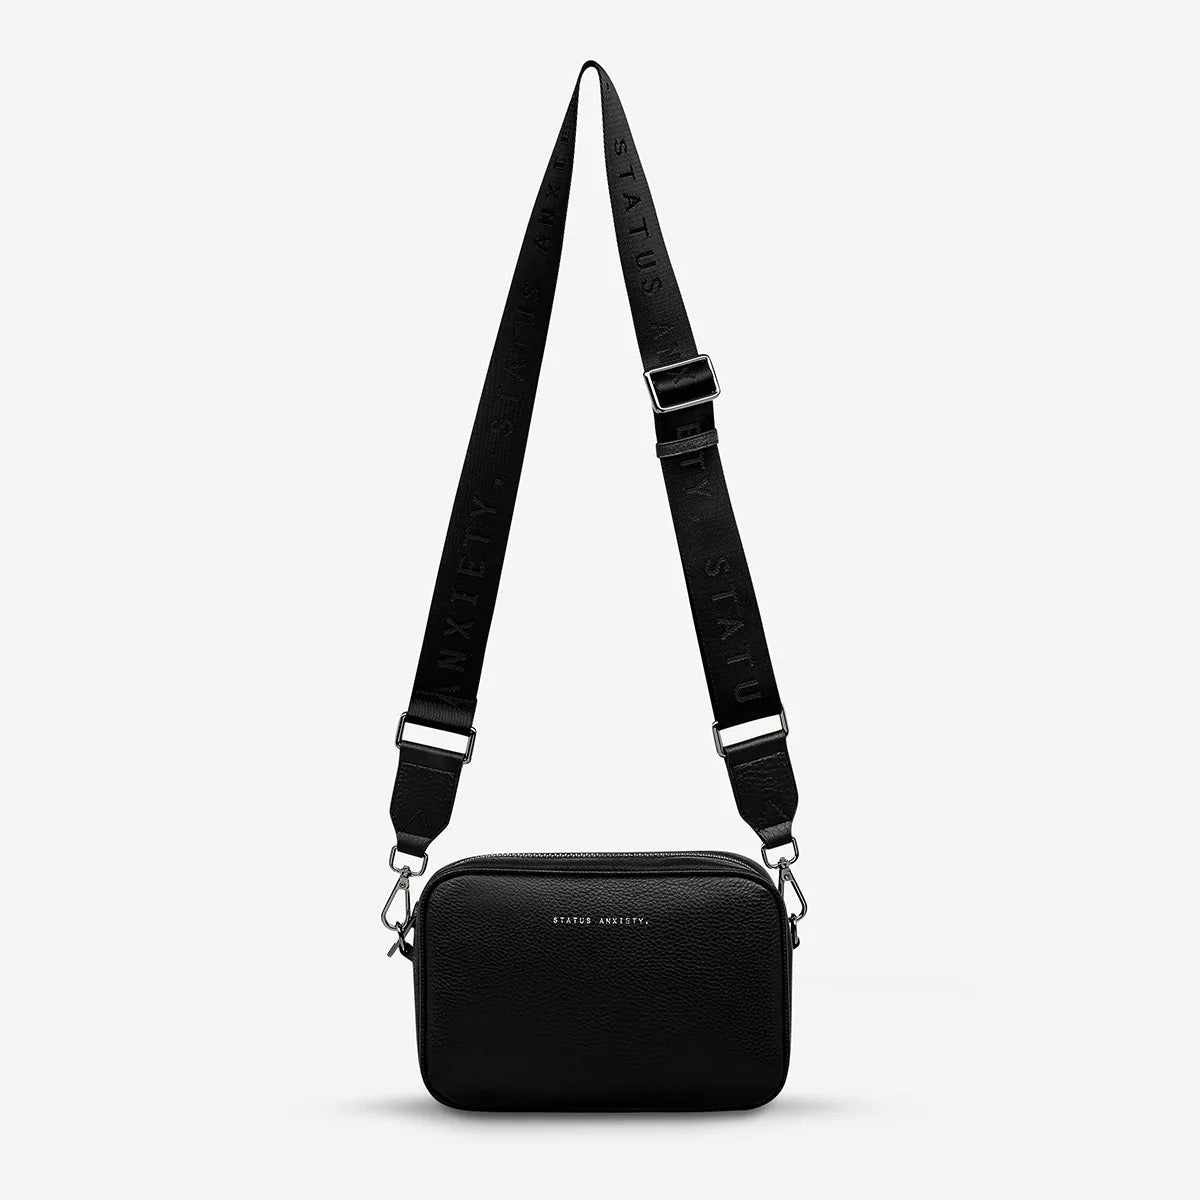 Status Anxiety - Plunder Bag With Webbed Strap - Black